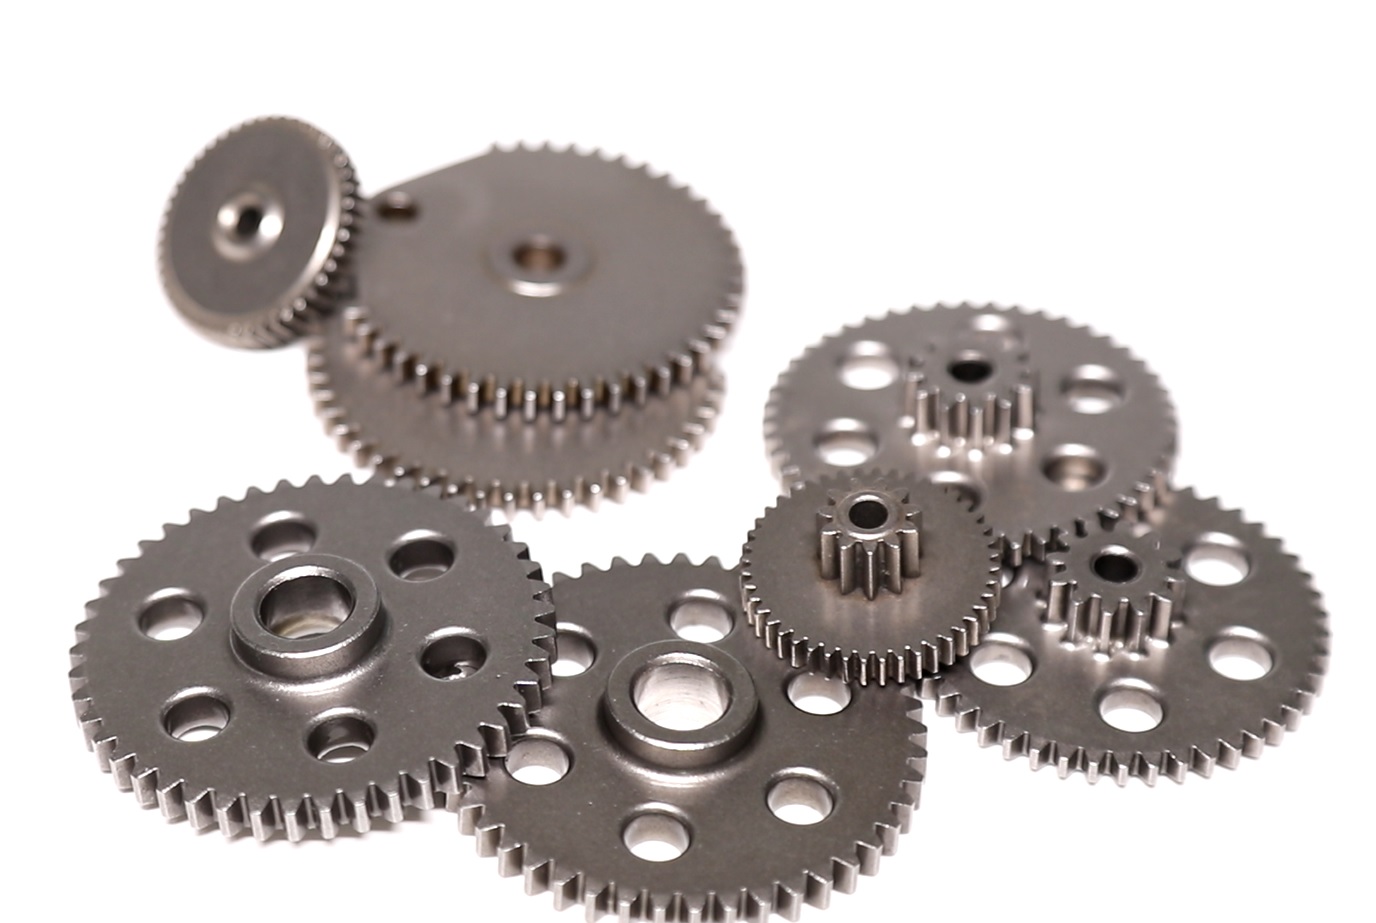 Why choose sintered gears using in the robot ?